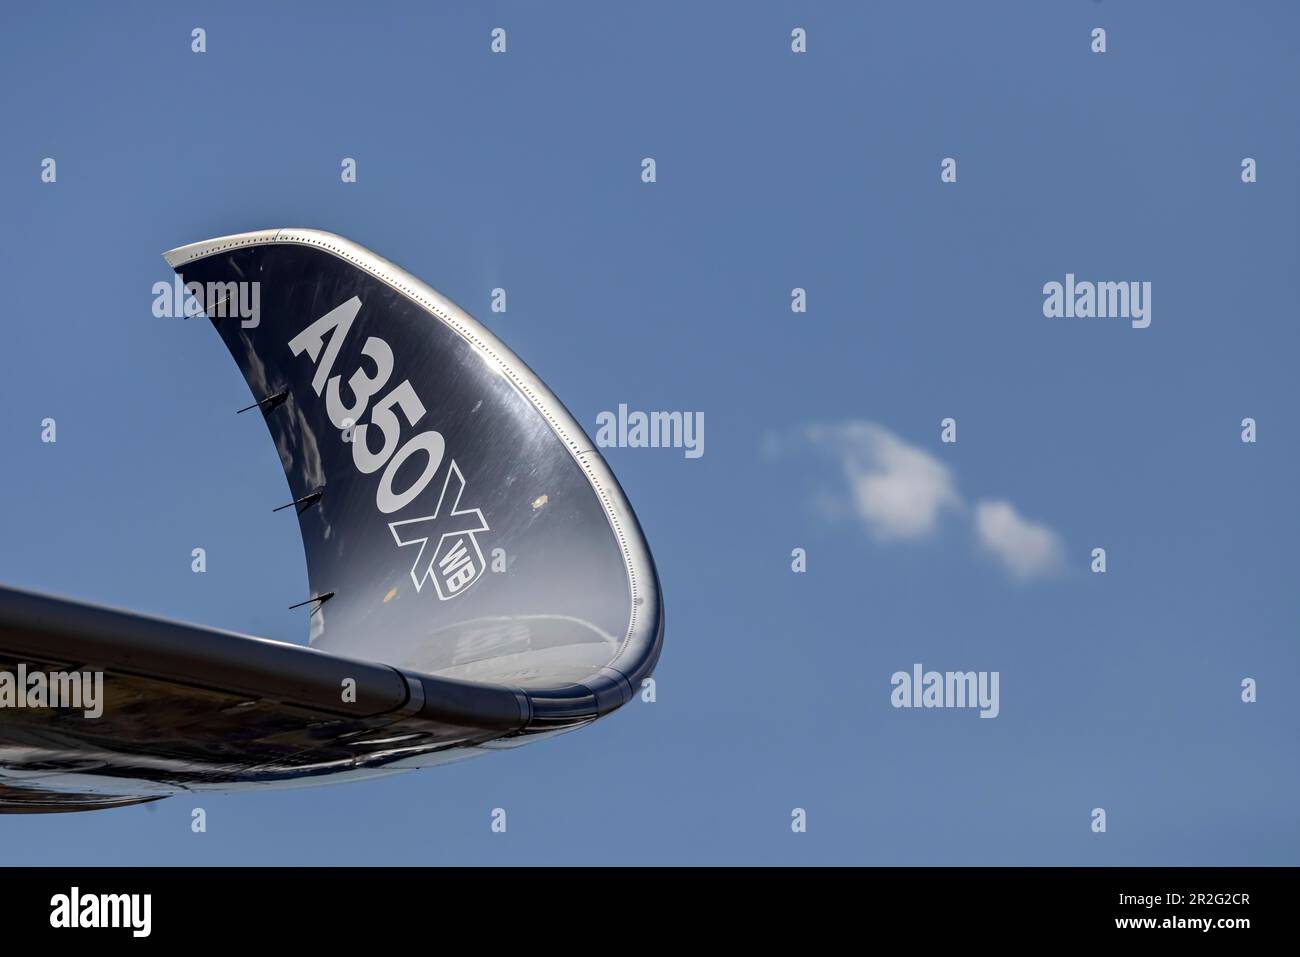 AIRBUS industrie, AIRBUS A350-900, Wing with Sharklets, Winglets, ILA Berlin Air Show, Berlin International Aerospace Exhibition, Schoenefeld Foto Stock